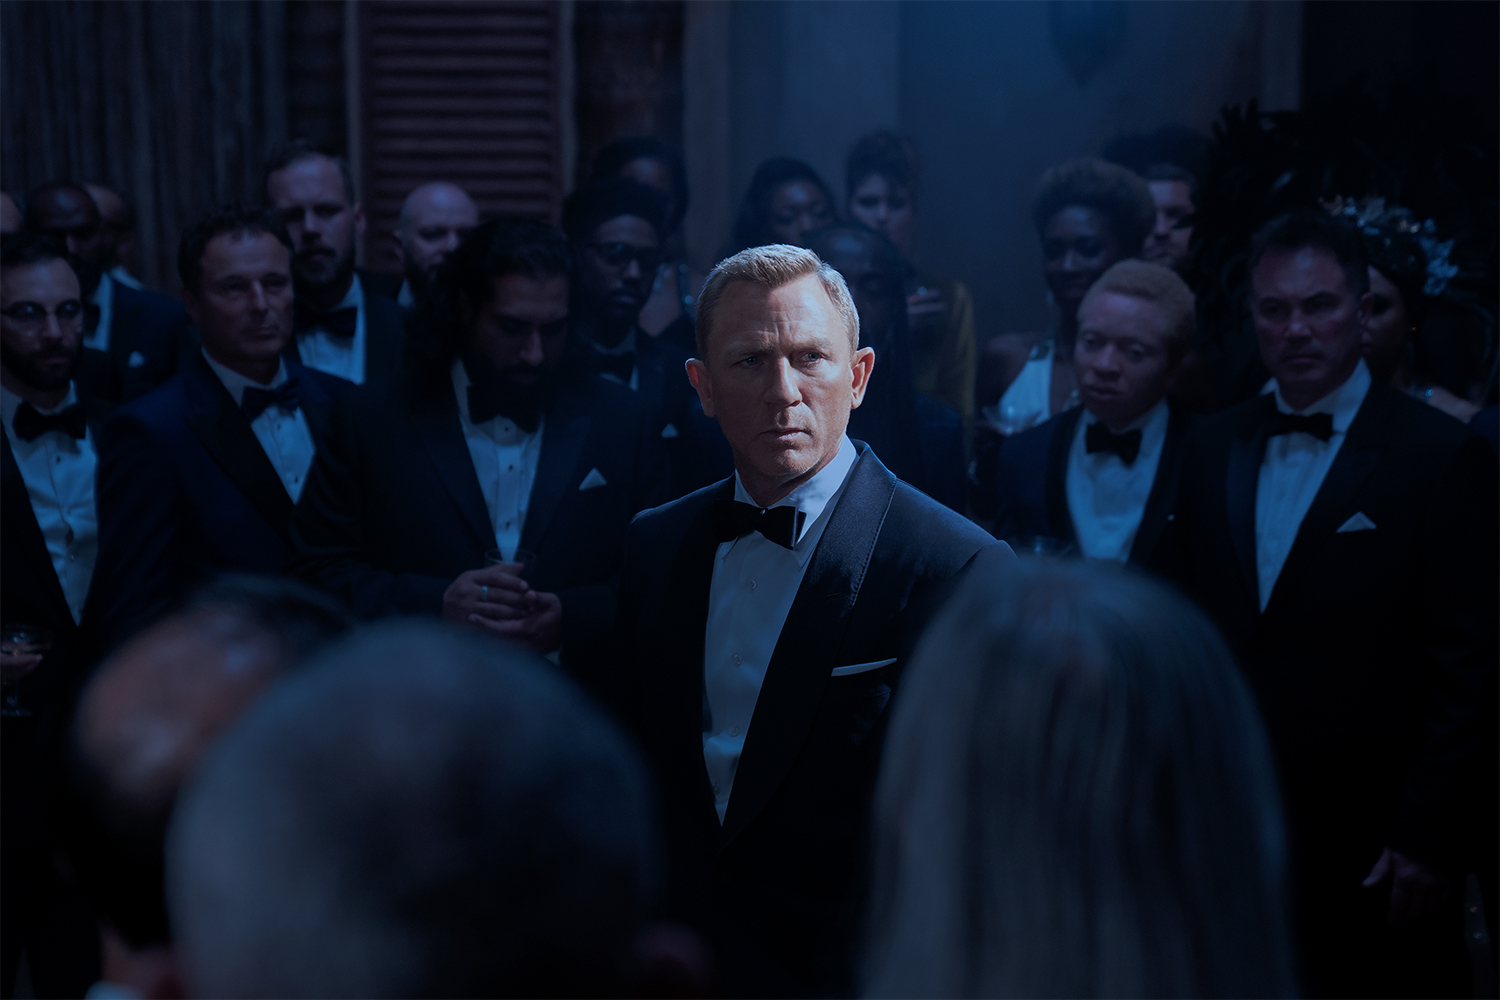 Daniel Craig as James Bond pictured in a tuxedo in "No Time to Die," surrounded by enemies from the secret organization Spectre